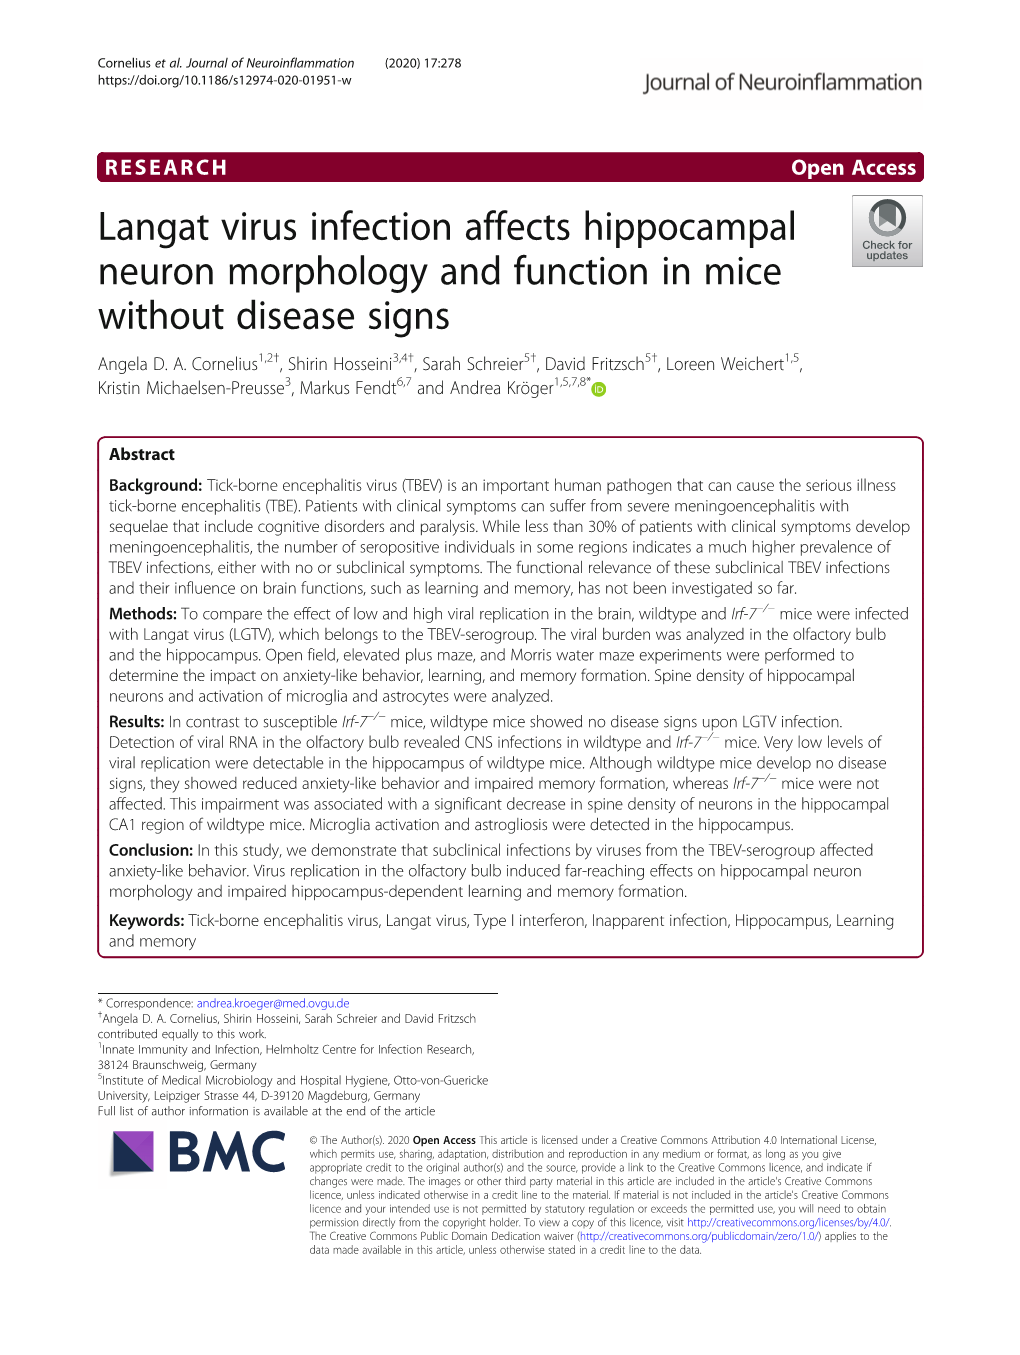 Langat Virus Infection Affects Hippocampal Neuron Morphology and Function in Mice Without Disease Signs Angela D